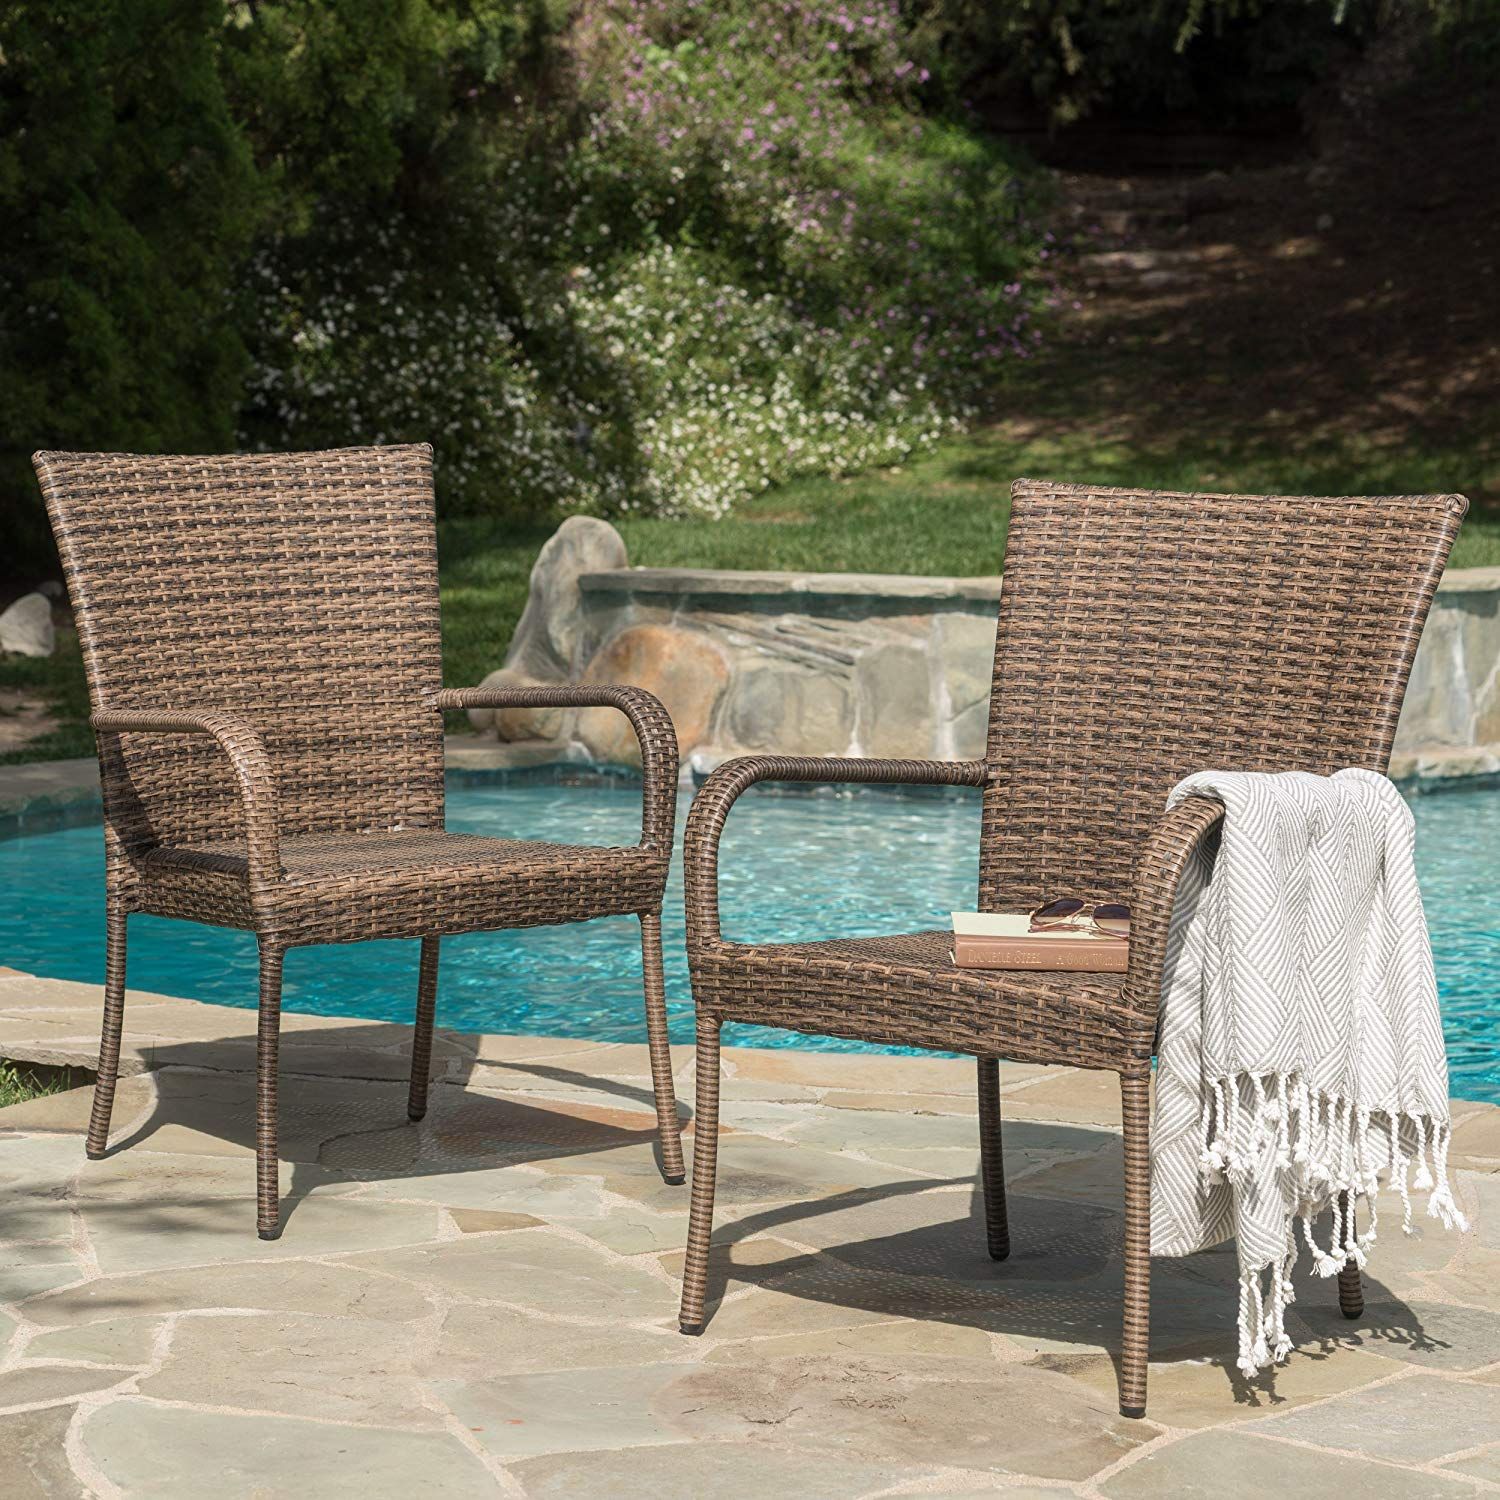 Cheap White Stackable Patio Chairs, Find White Stackable Patio Chairs With Regard To Mocha Fabric Outdoor Wicker Armchair Sets (View 13 of 15)